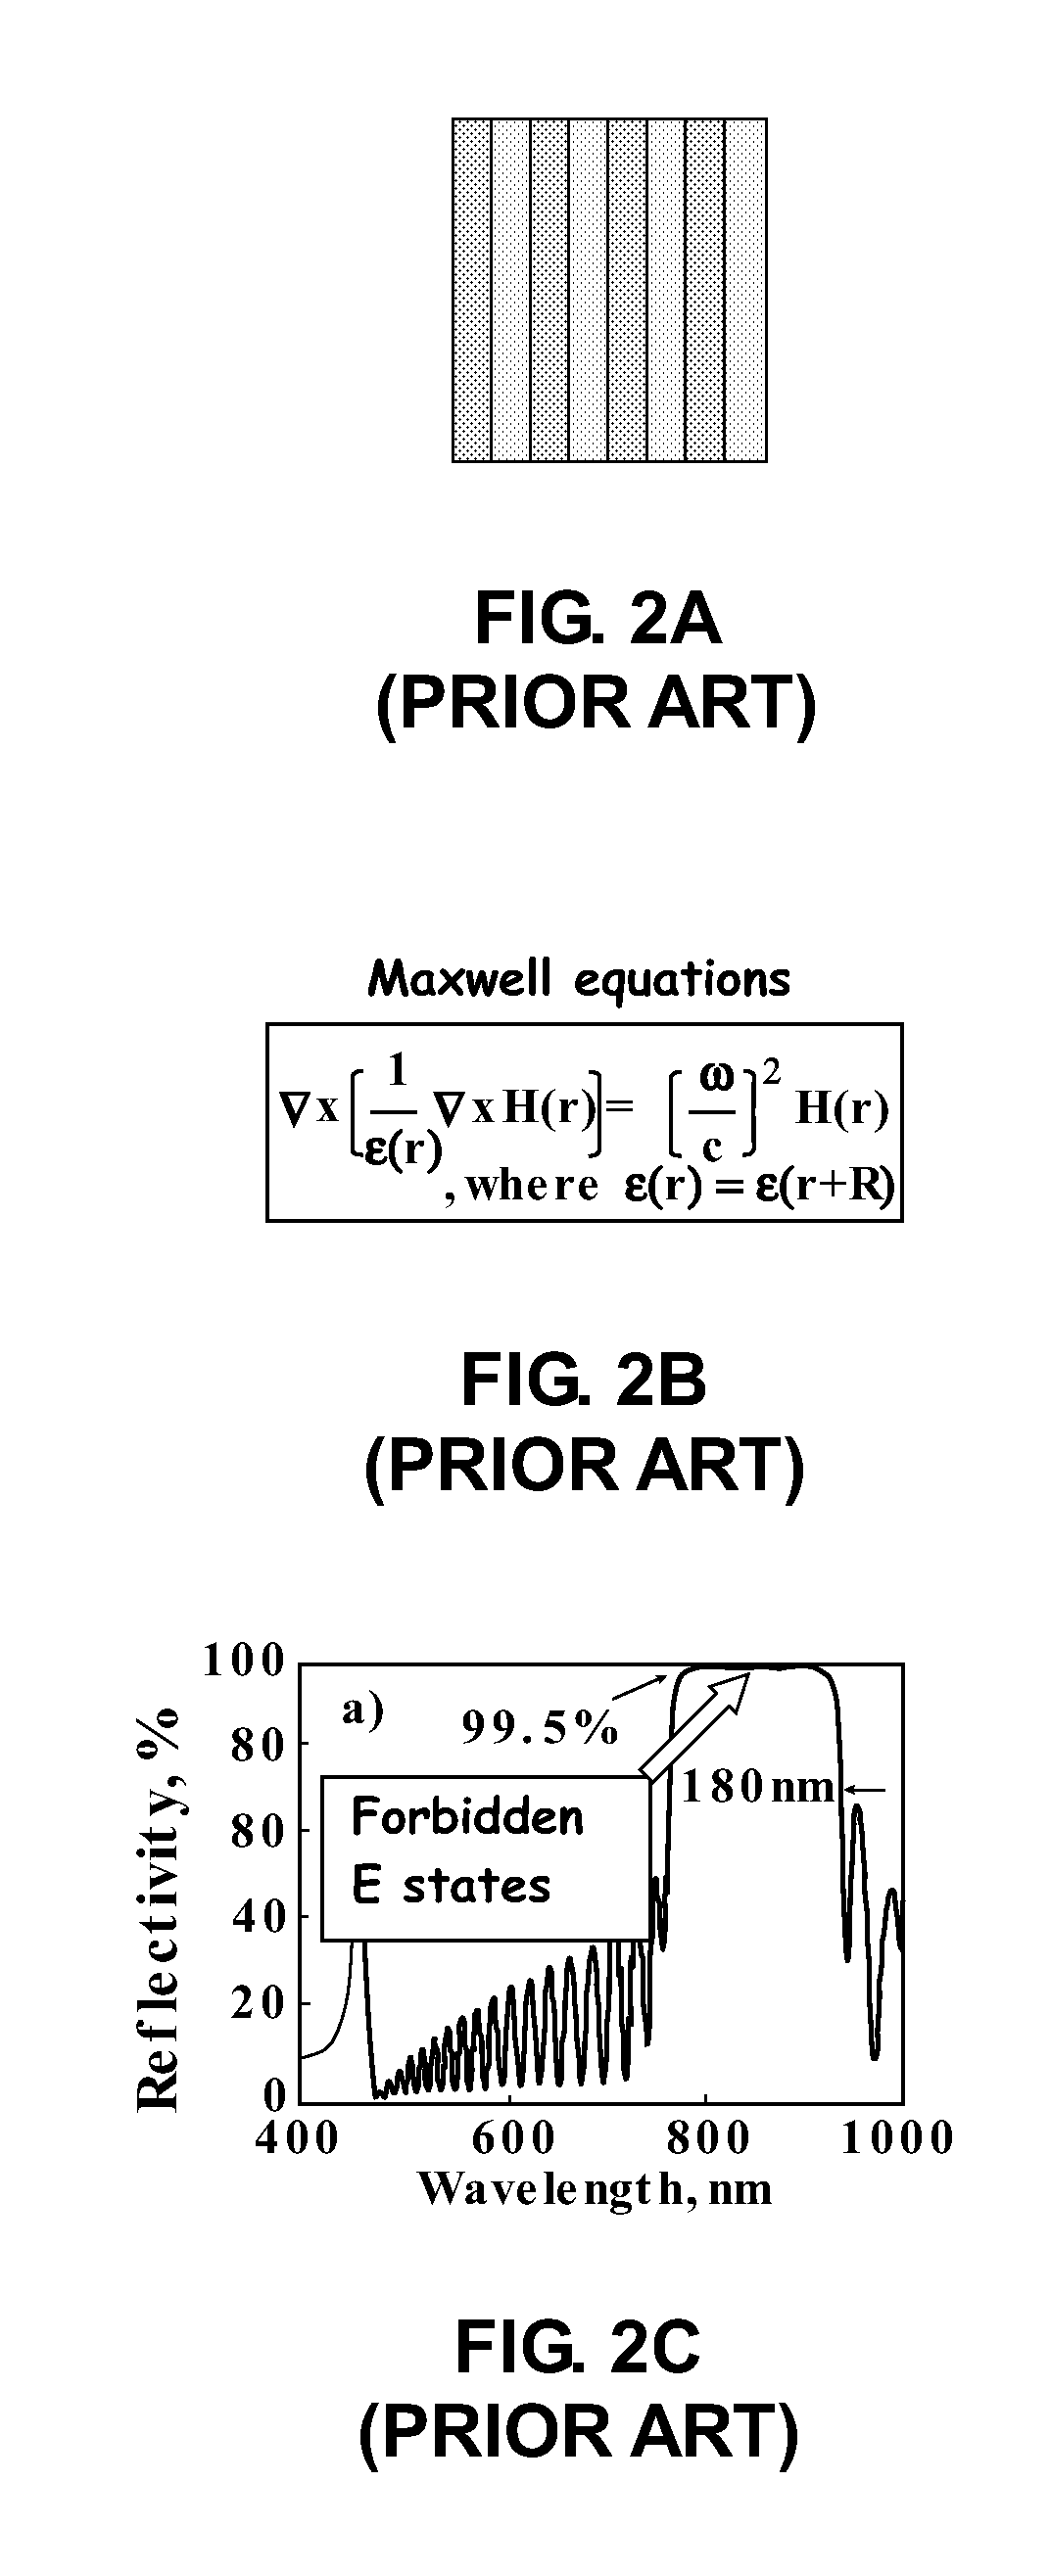 Multiplexed photonic membranes and related detection methods for chemical and/or biological sensing applications